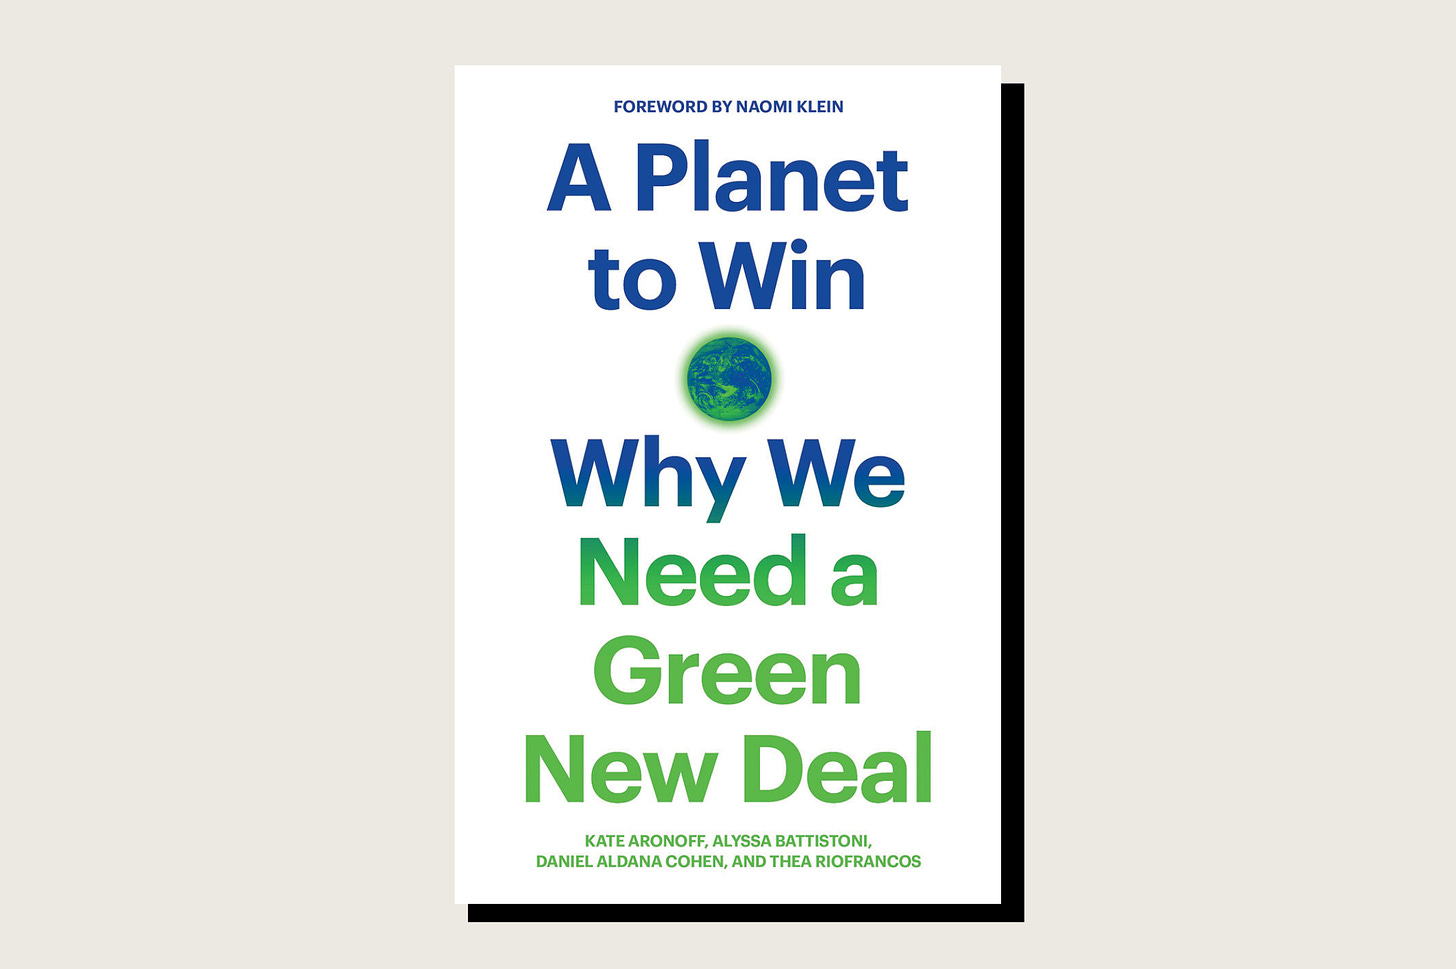 https://foreignpolicy.com/wp-content/uploads/2020/01/planet-to-win-why-we-need-a-green-new-deal-book-cover.jpg